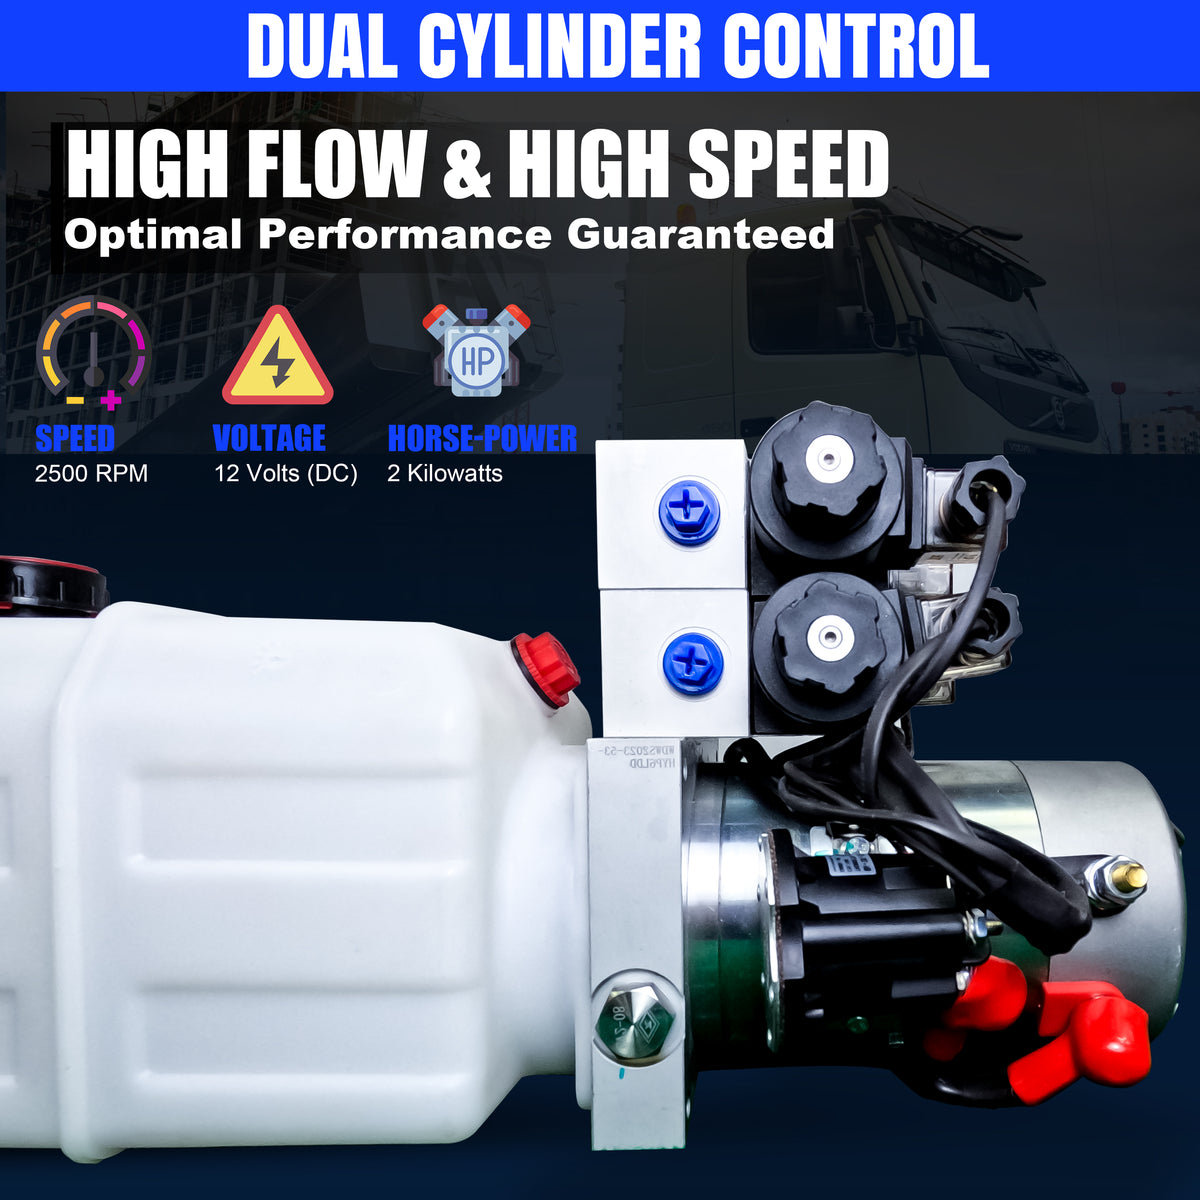 Primary Mover 12V Dual Double-Acting Hydraulic Power Unit: Compact, powerful unit for dump trailers and trucks. Simultaneously operates four hydraulic actions for versatility and efficiency.